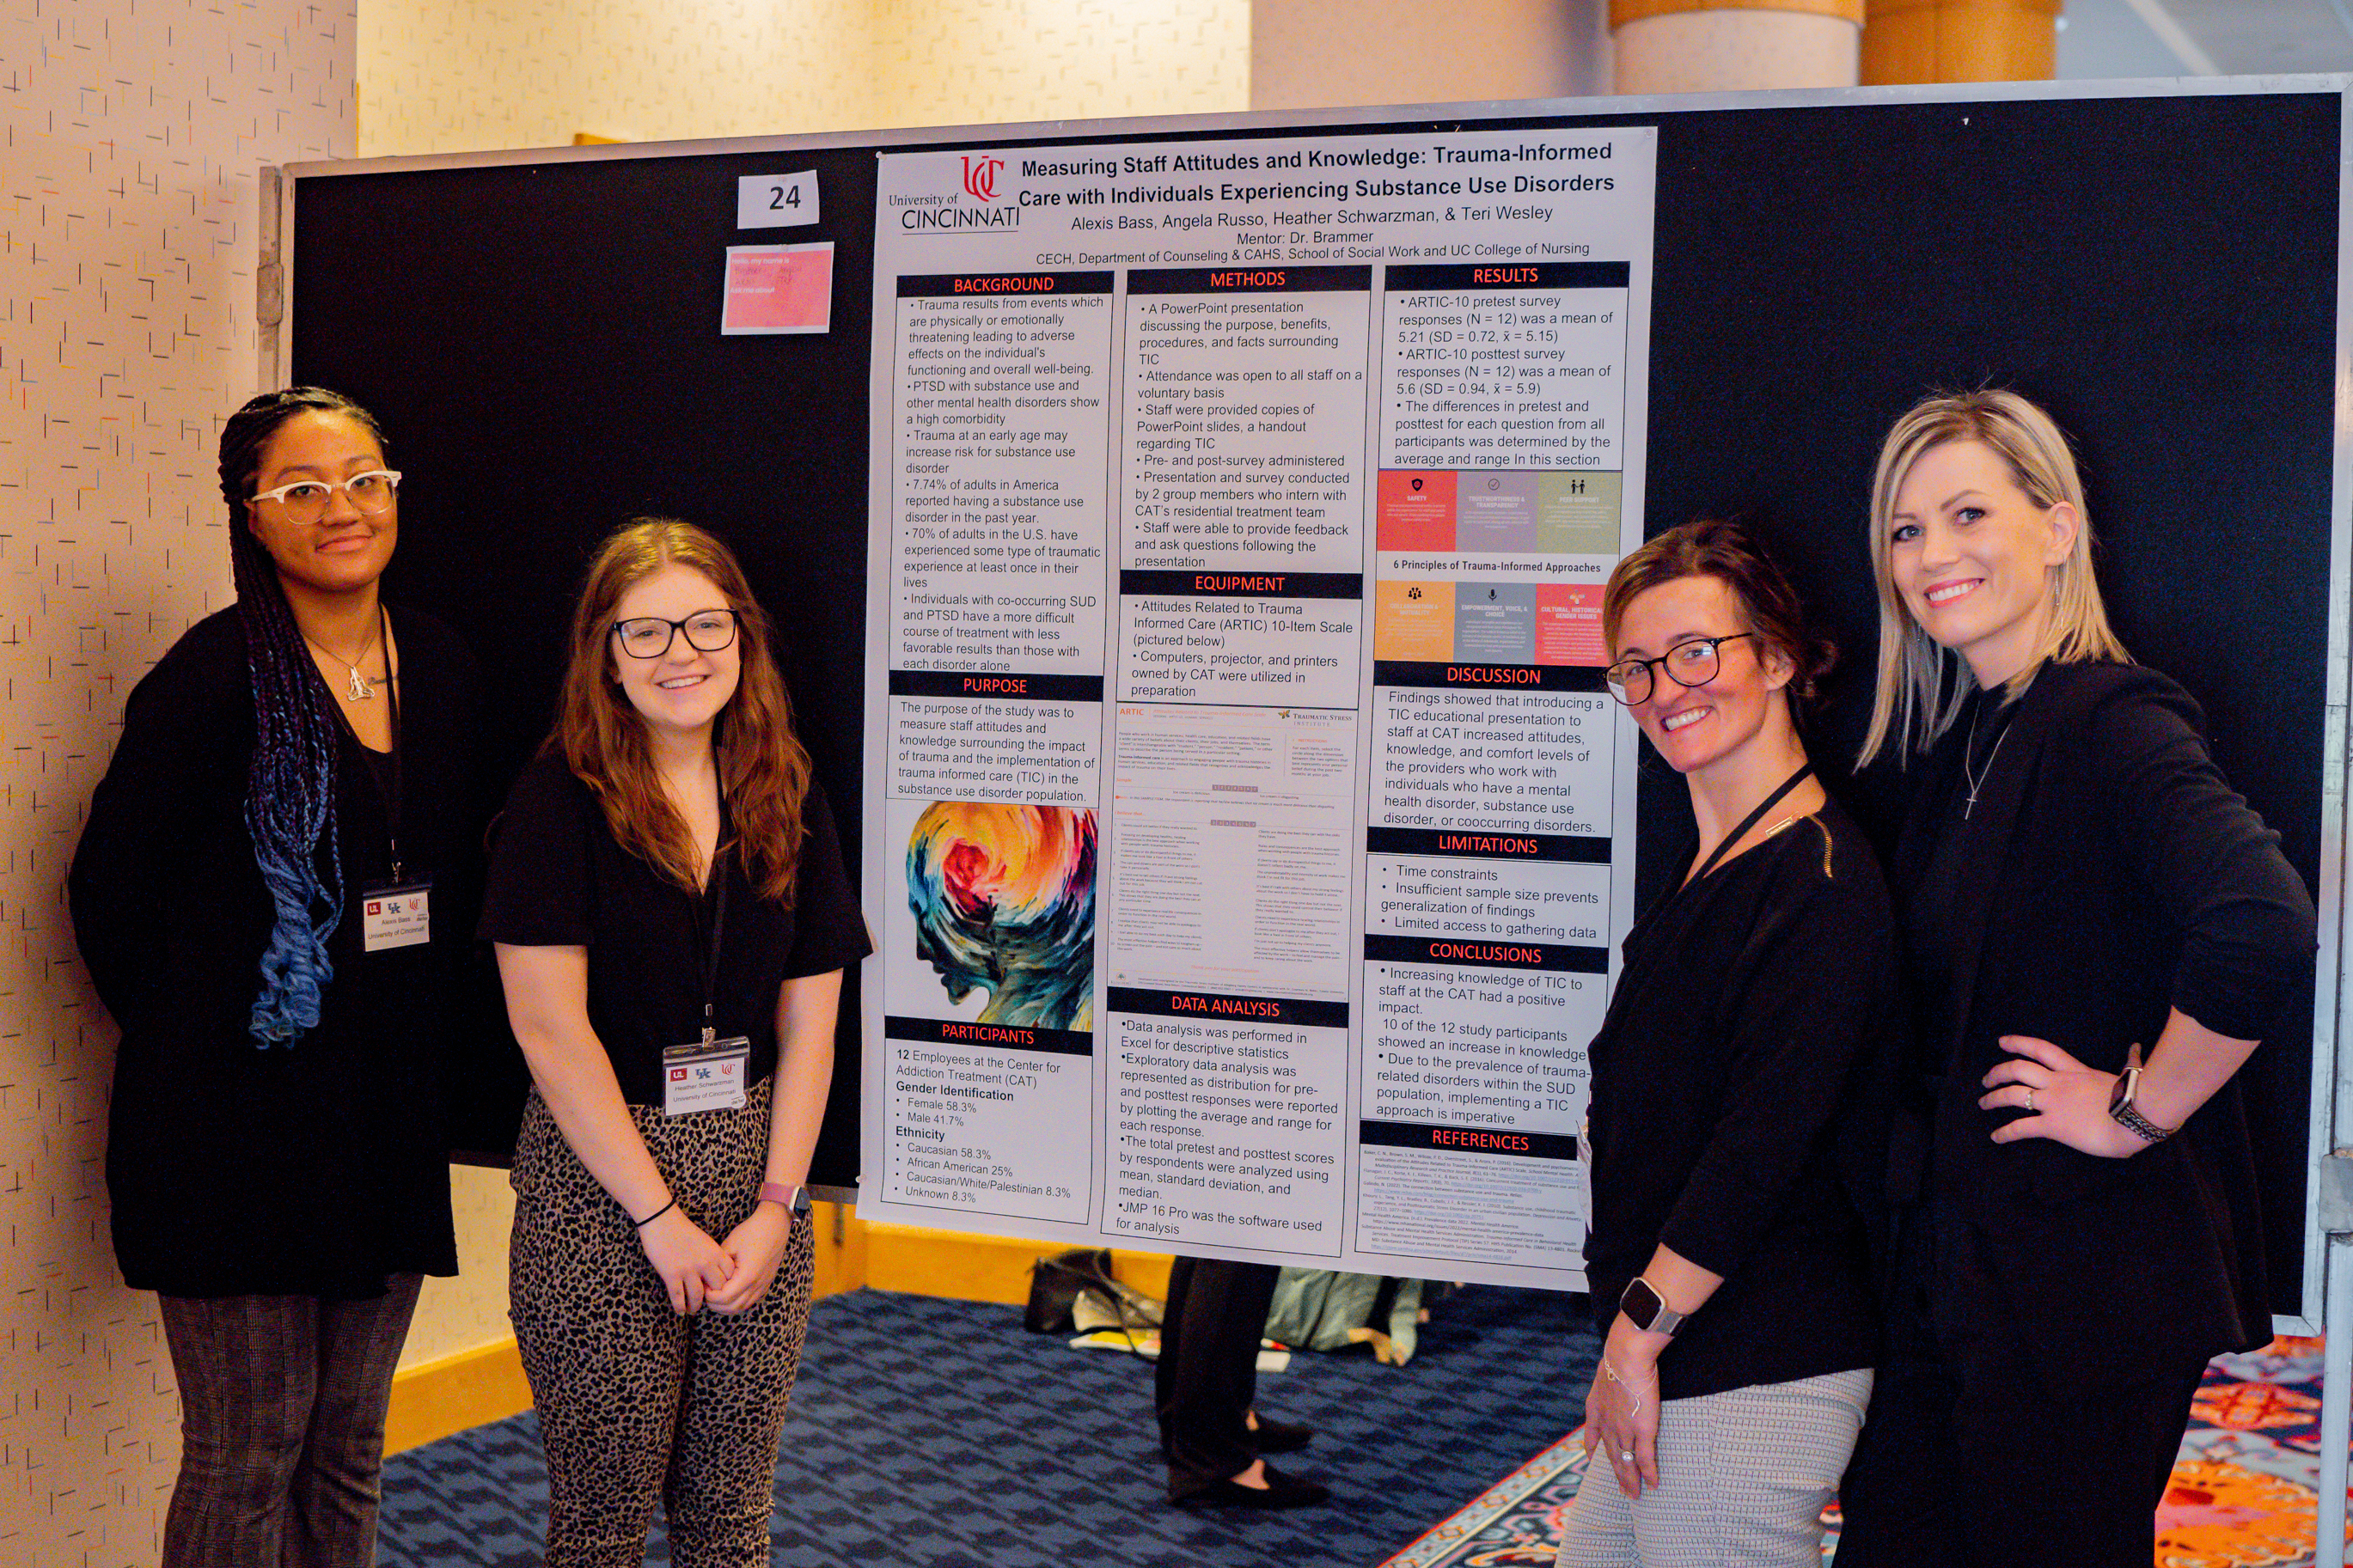 Attendees presenting research at conference